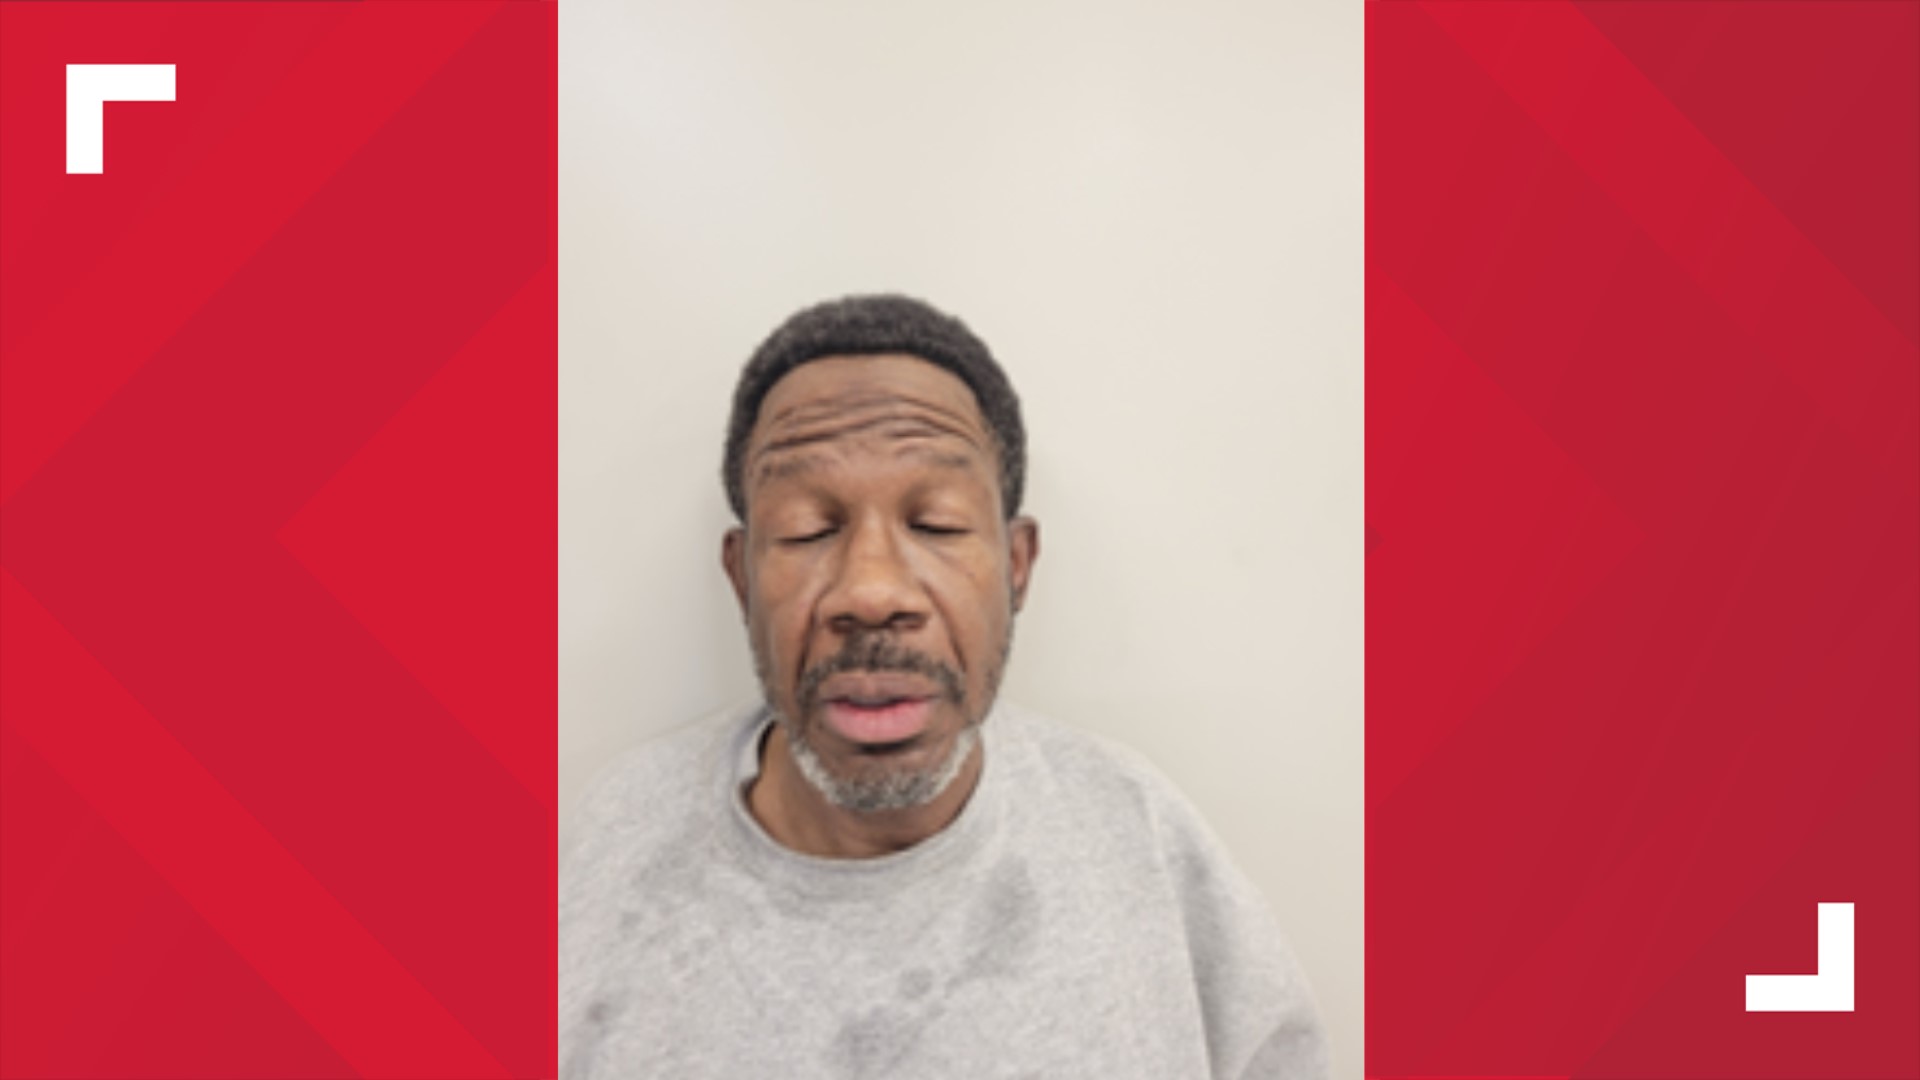 57-year-old Kenneth Marvin Hart has been charged with Robbery and a Parole Violation warrant.